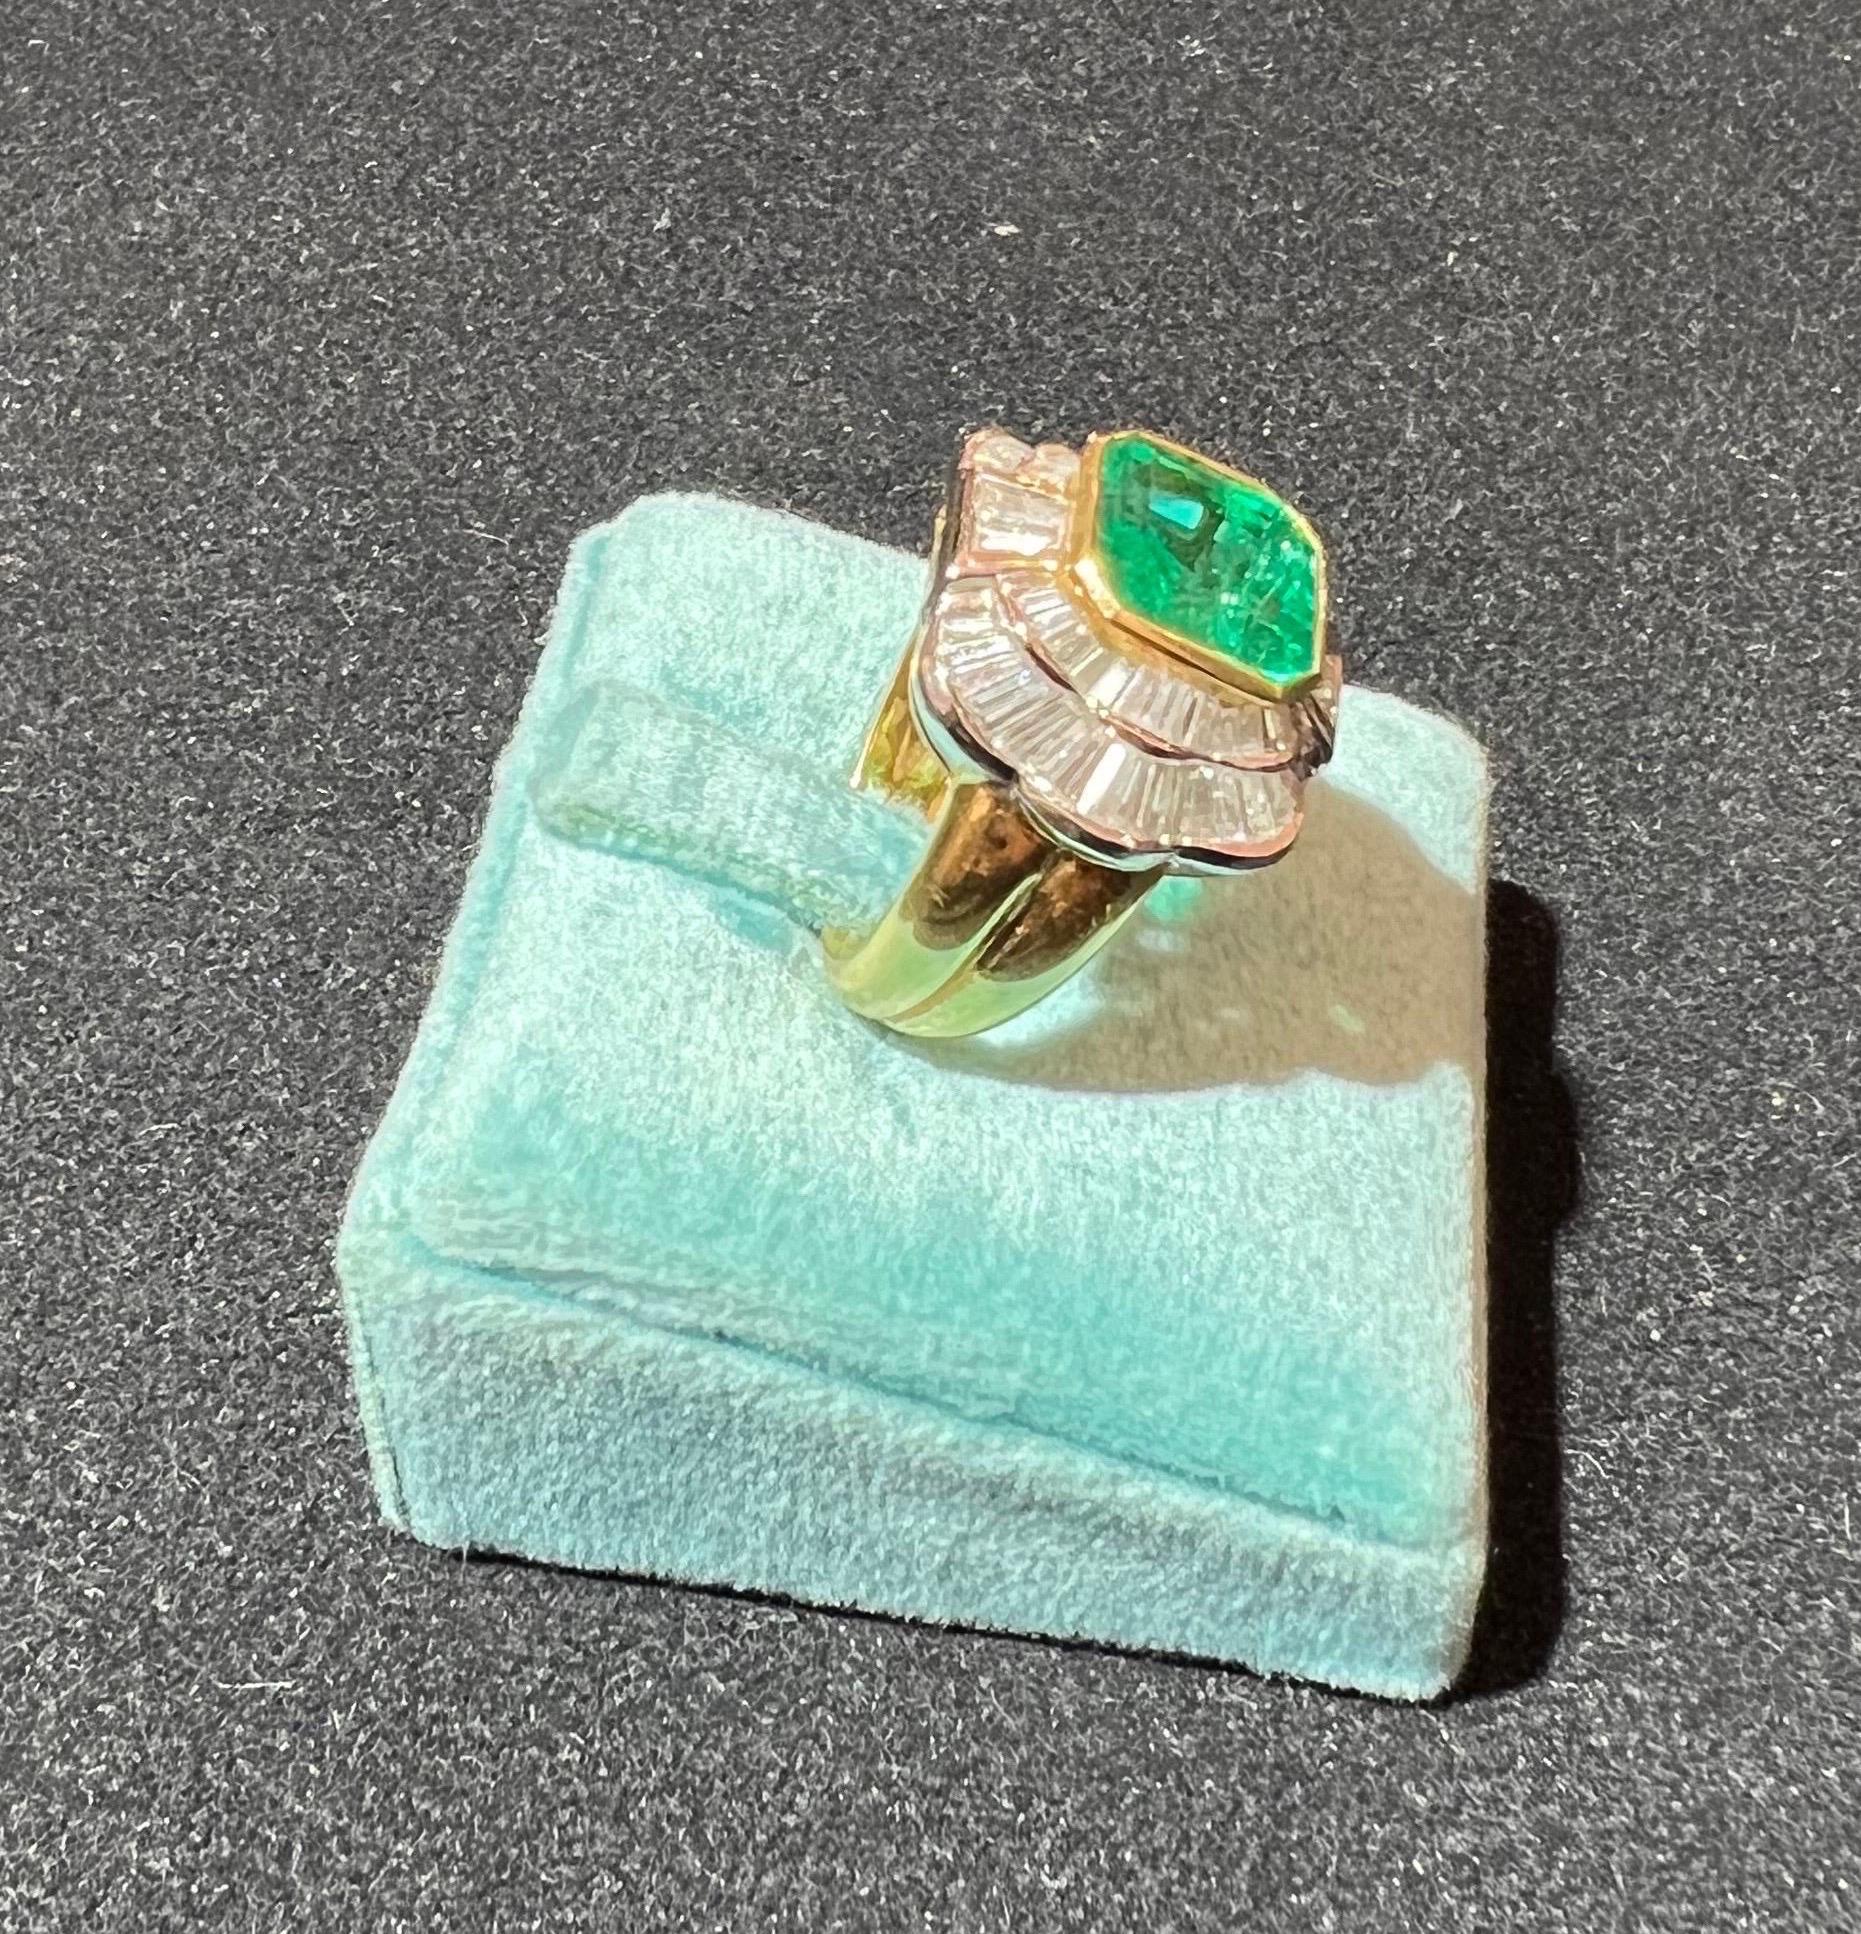 Wonderful 18-carat yellow gold ring with 3 carat Colombian emerald and 1.83 carat baguette-cut diamonds.

Accompanied by a gemology certificate.